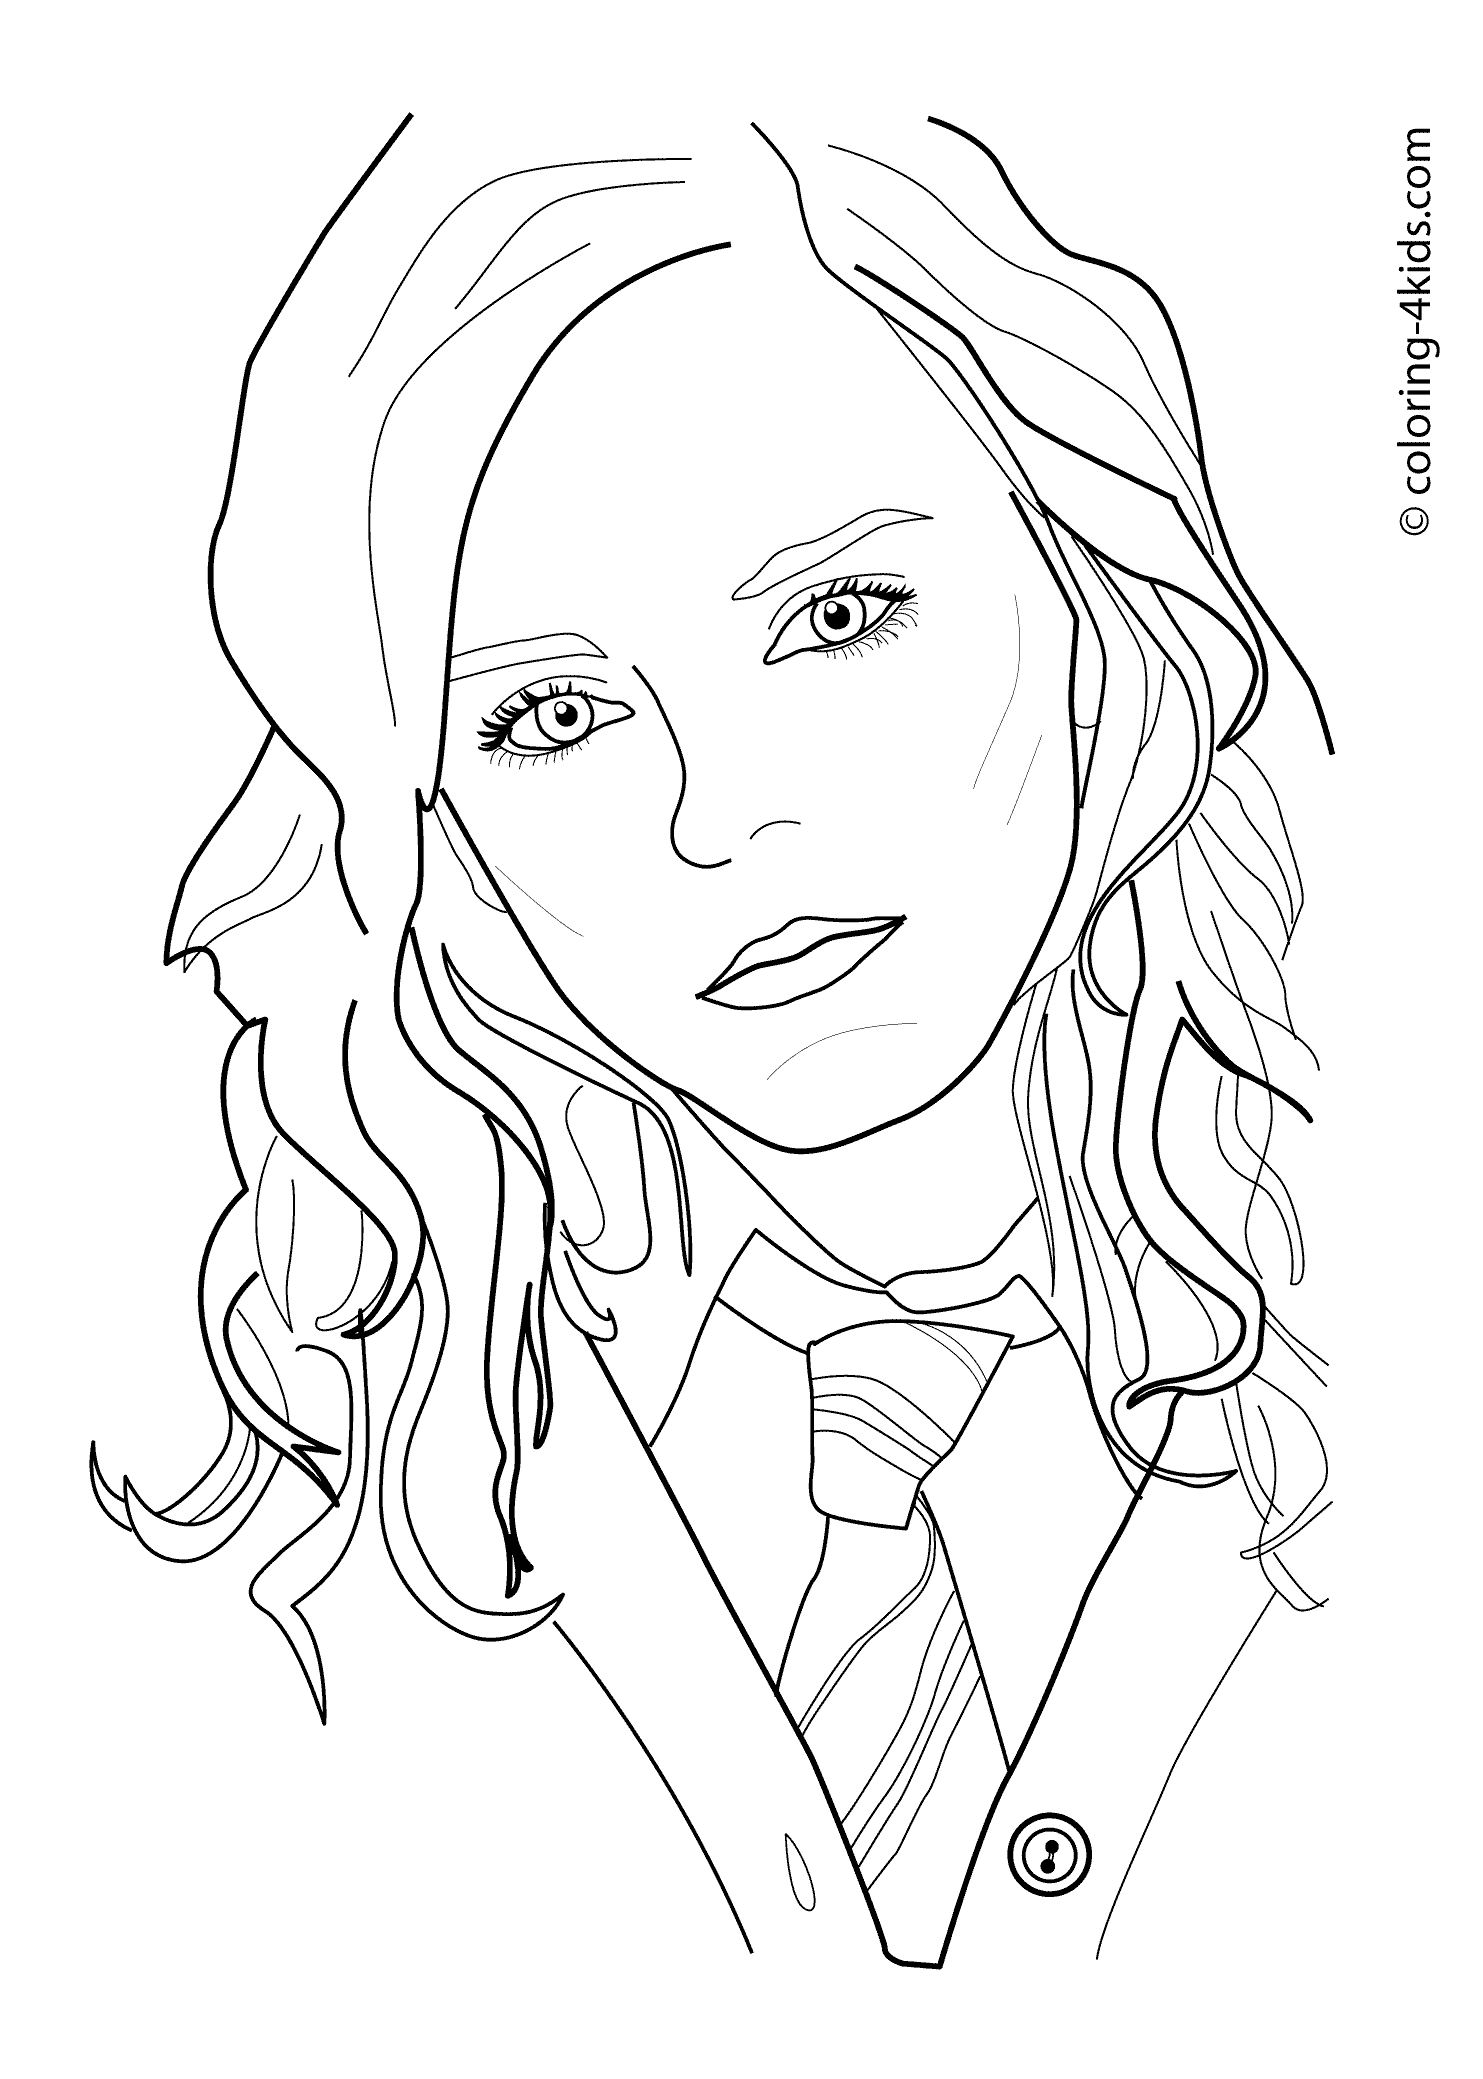 Emma watson coloring pages for kids printable free coloring books harry potter coloring pages harry potter art drawings harry potter drawings